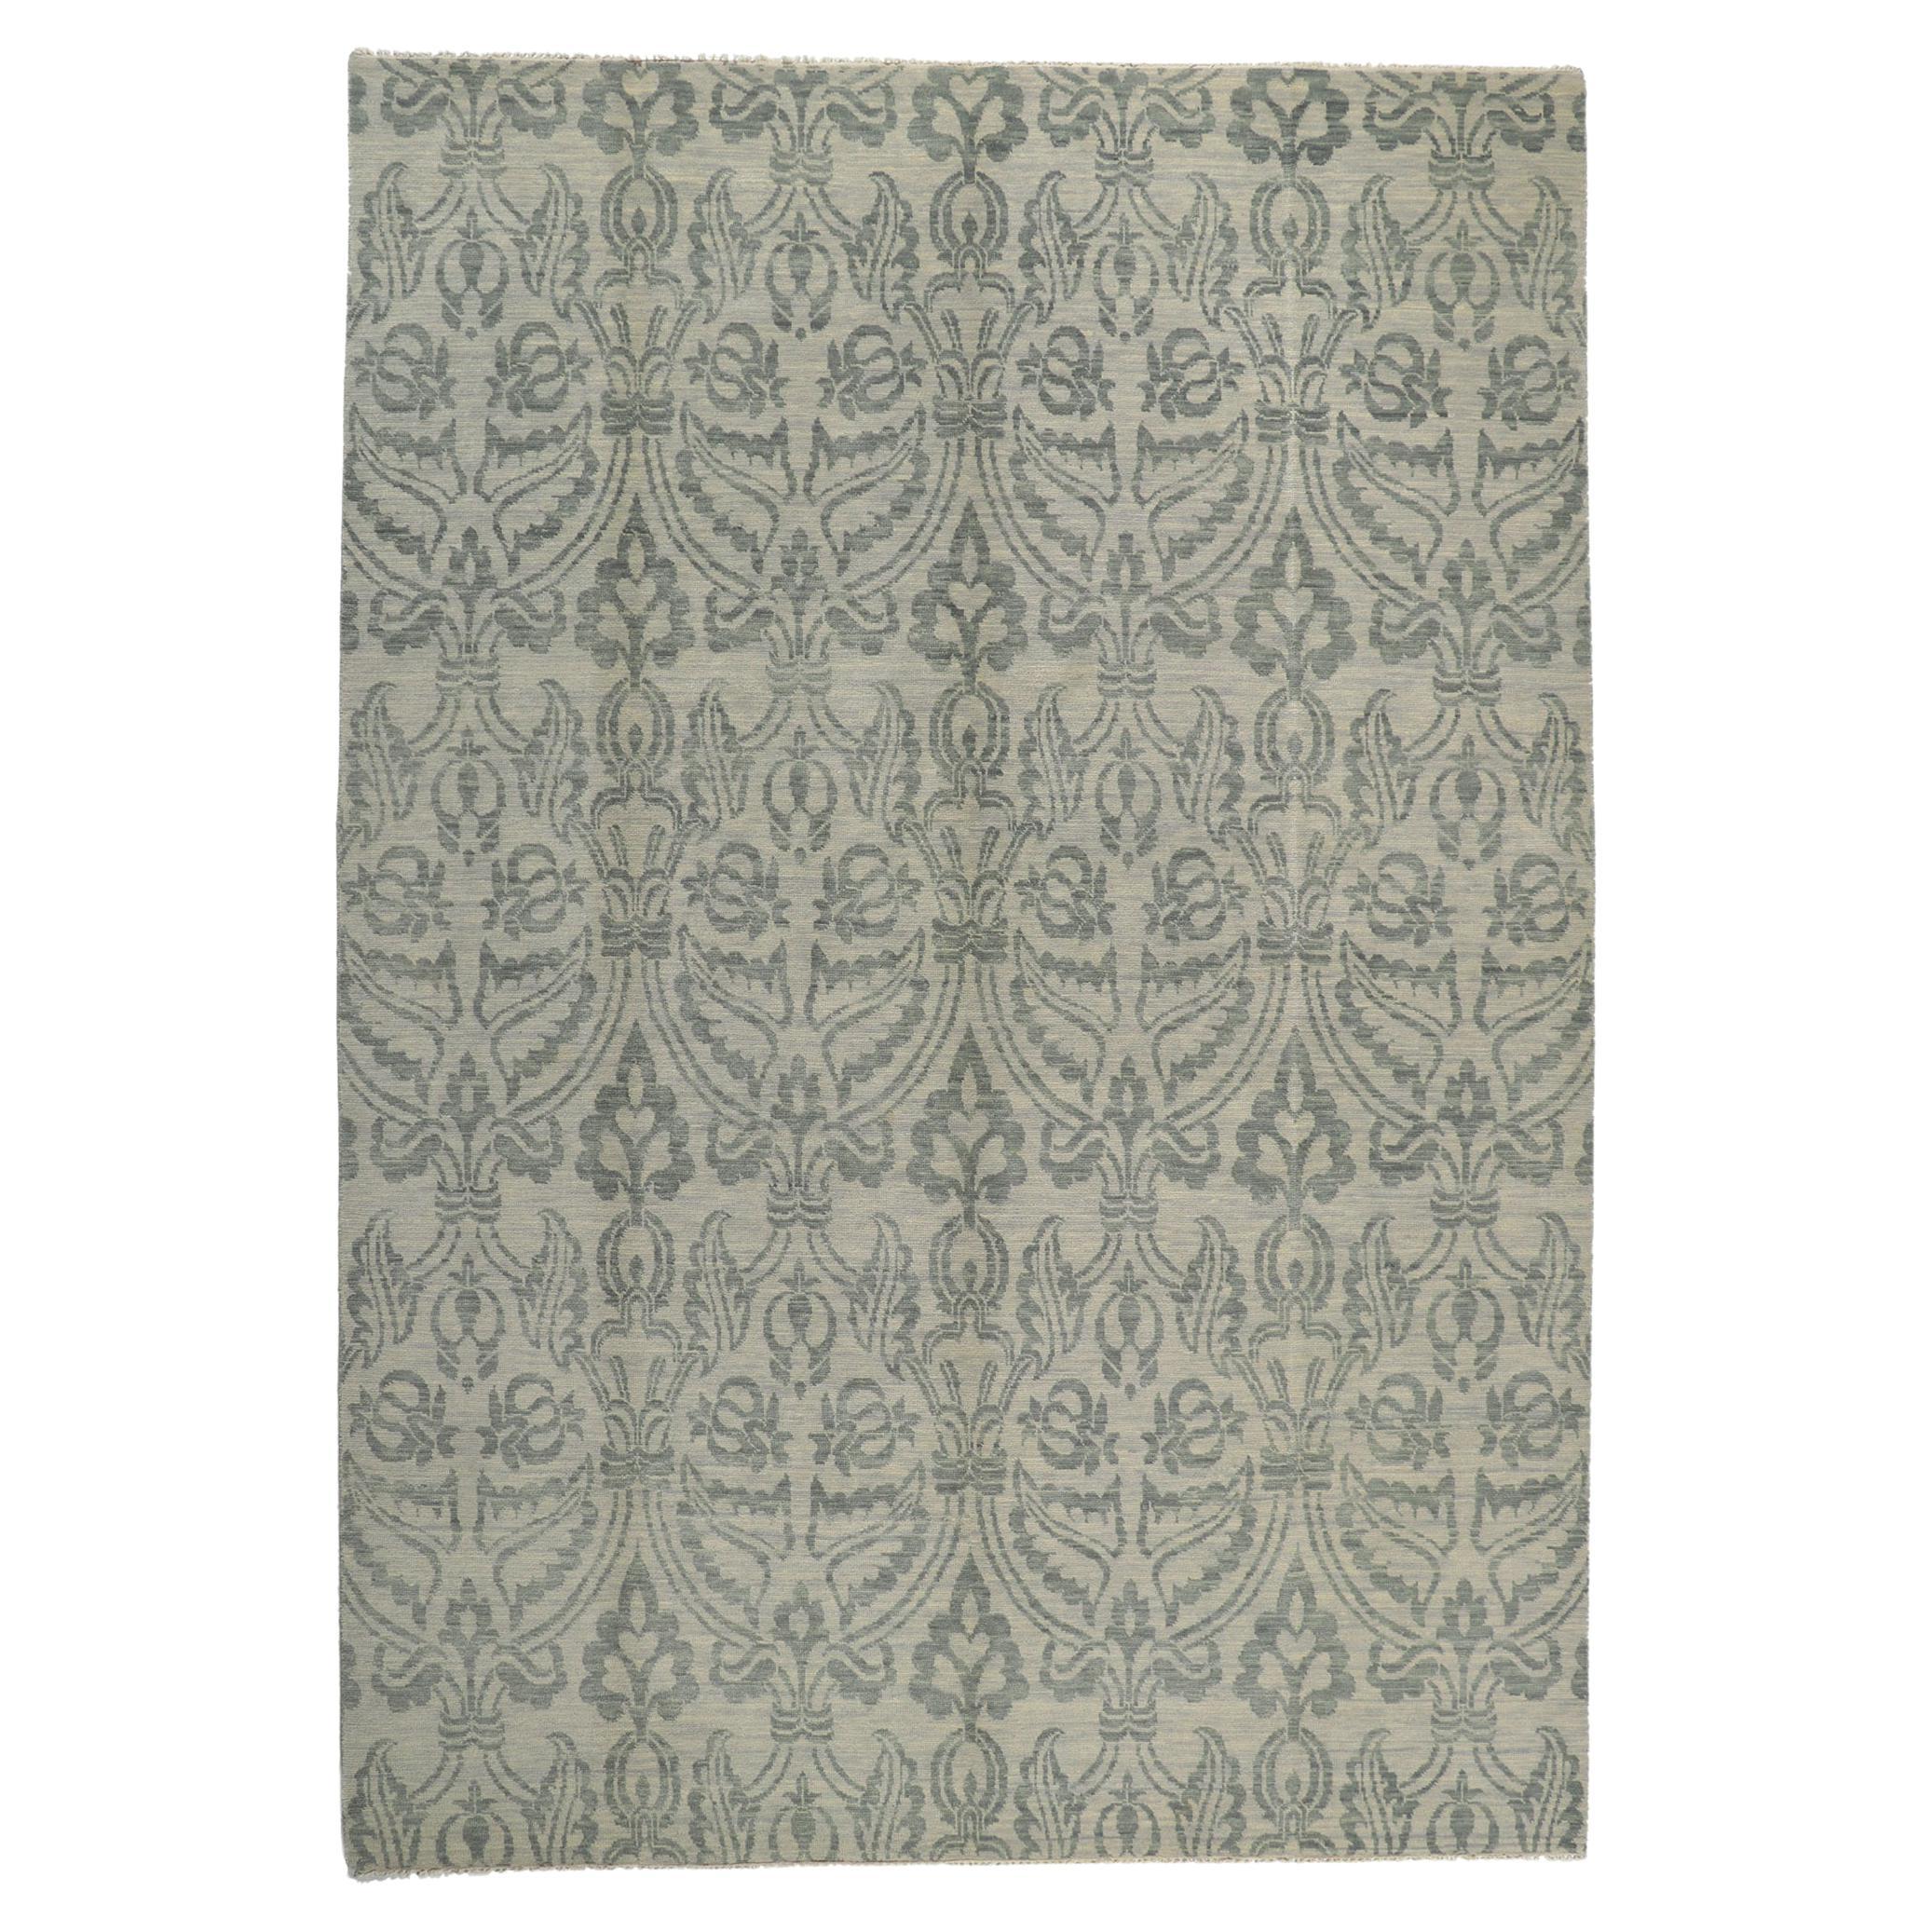 New Transitional Damask Ikat Rug with Blue and Gray Earth-Tone Colors